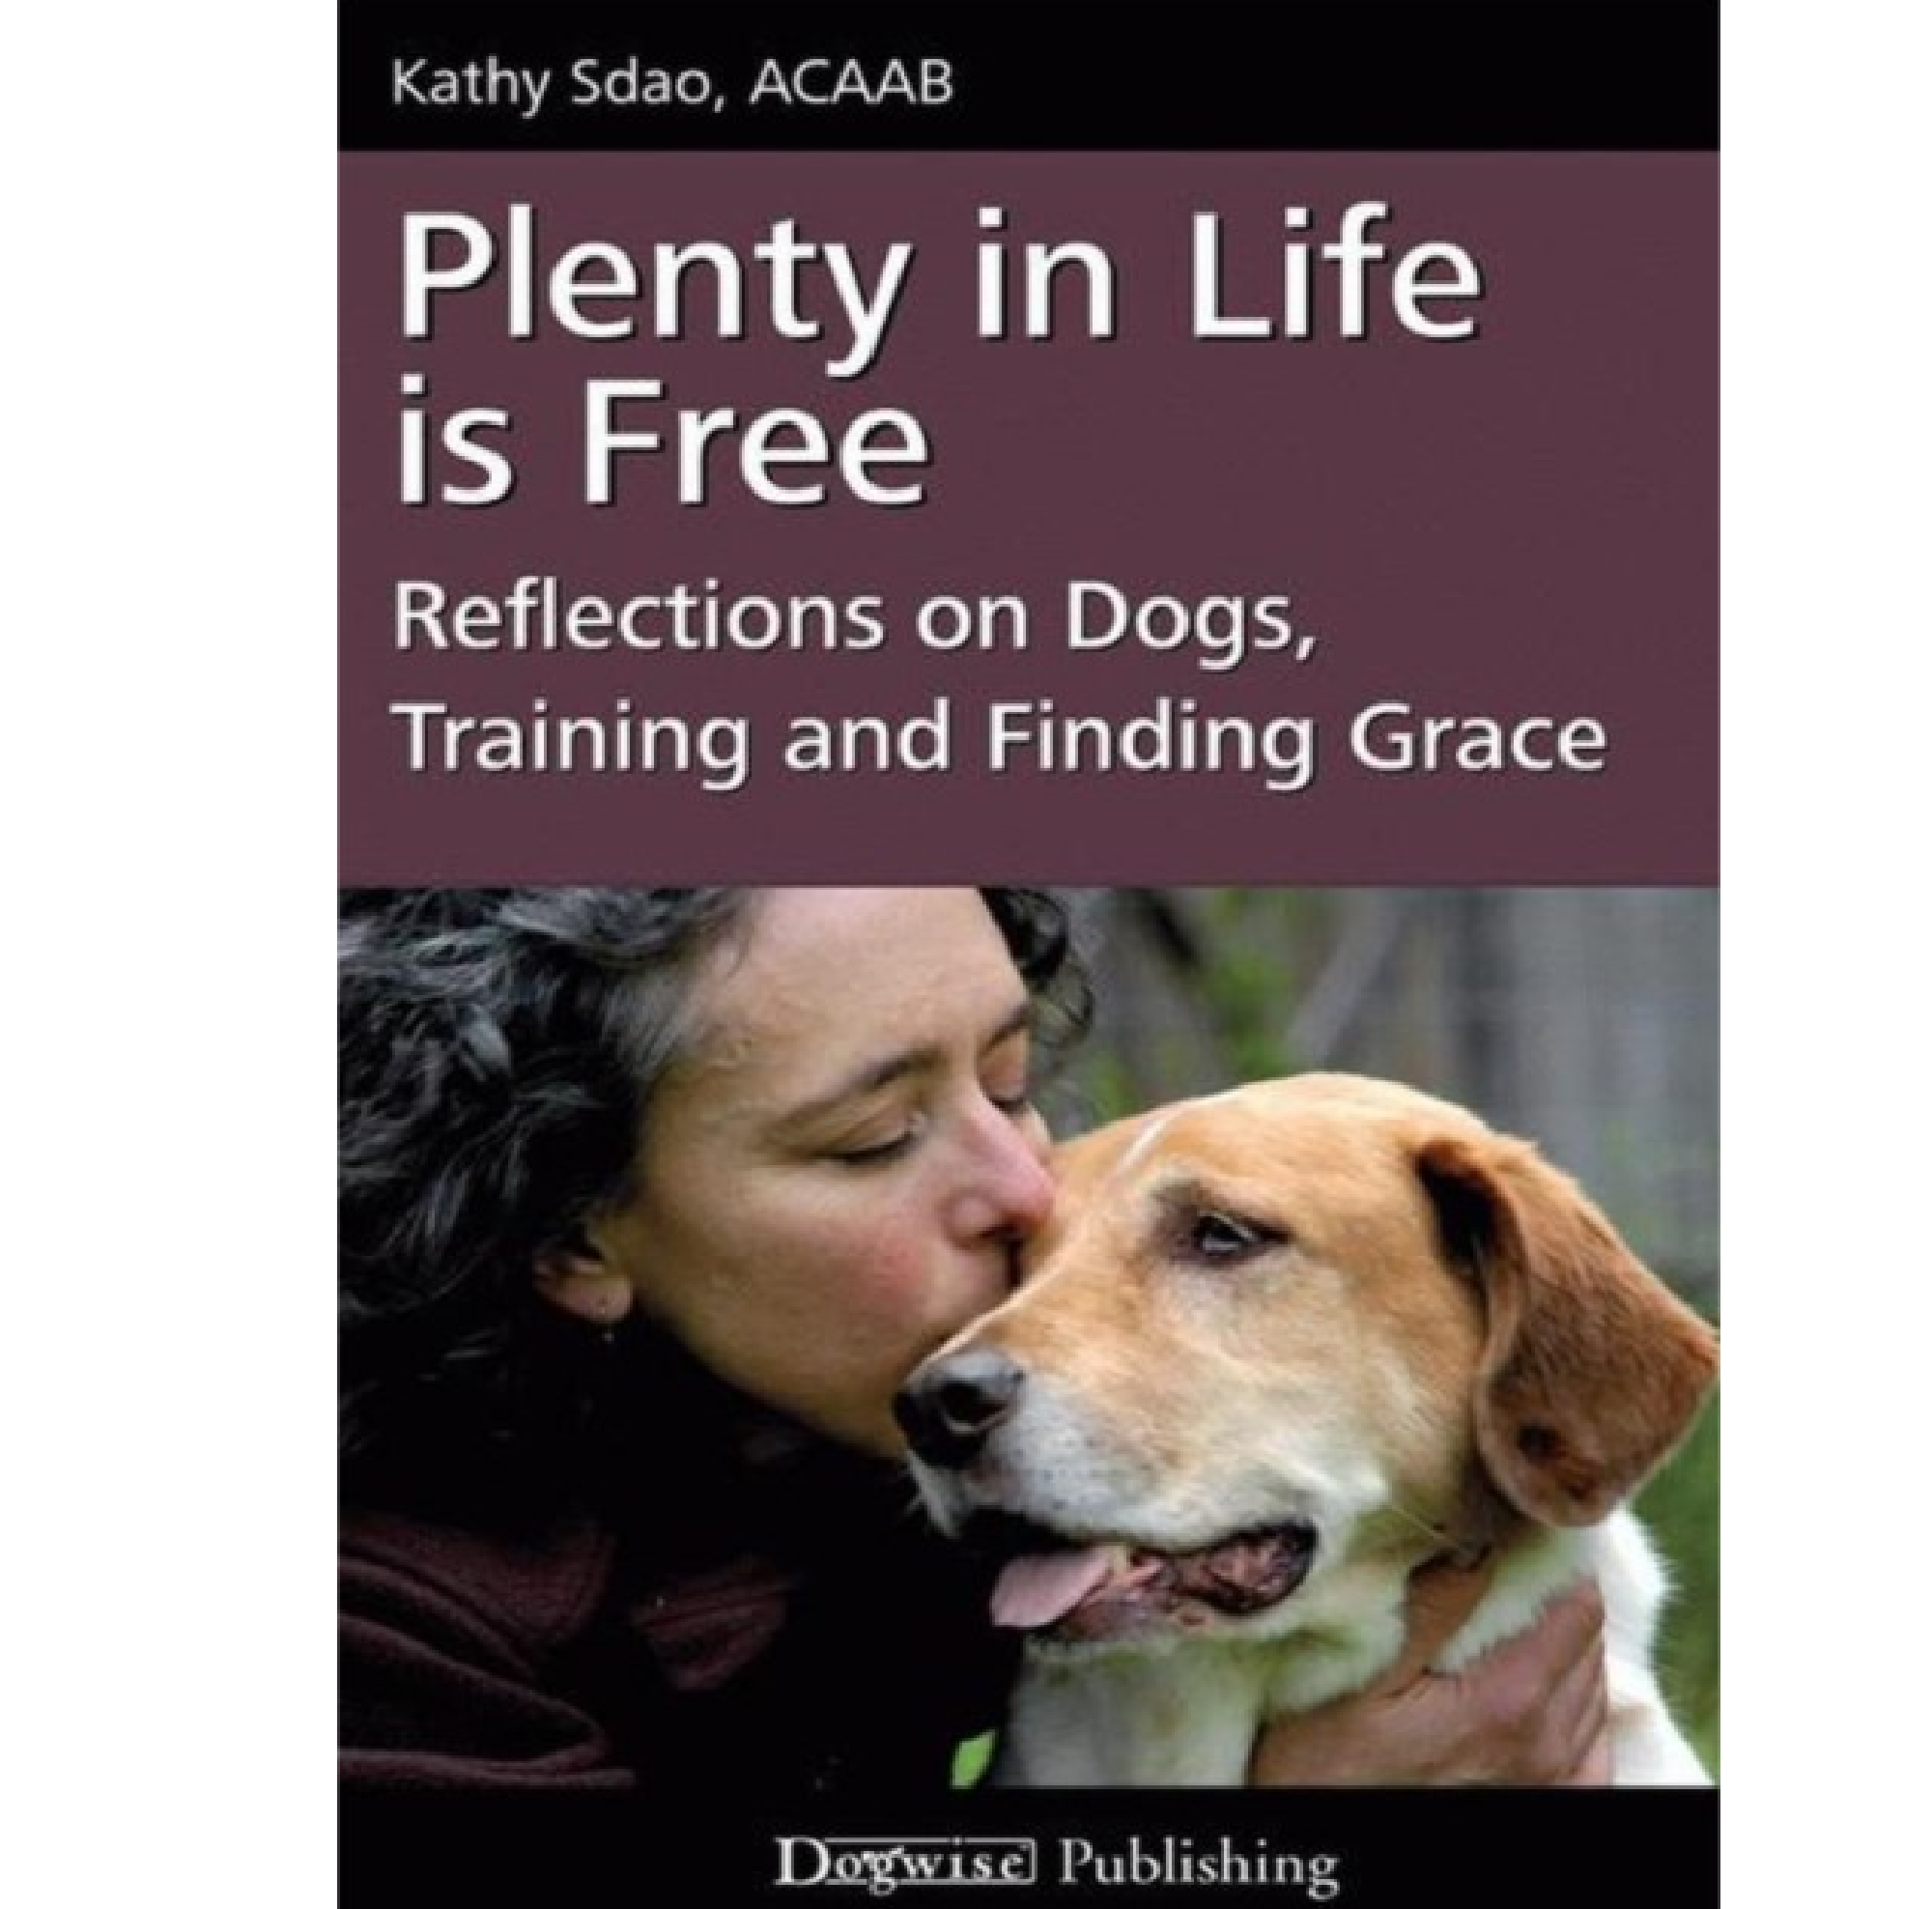 Plenty In Life Is Free - Reflections On Dogs, Training and Finding Grace